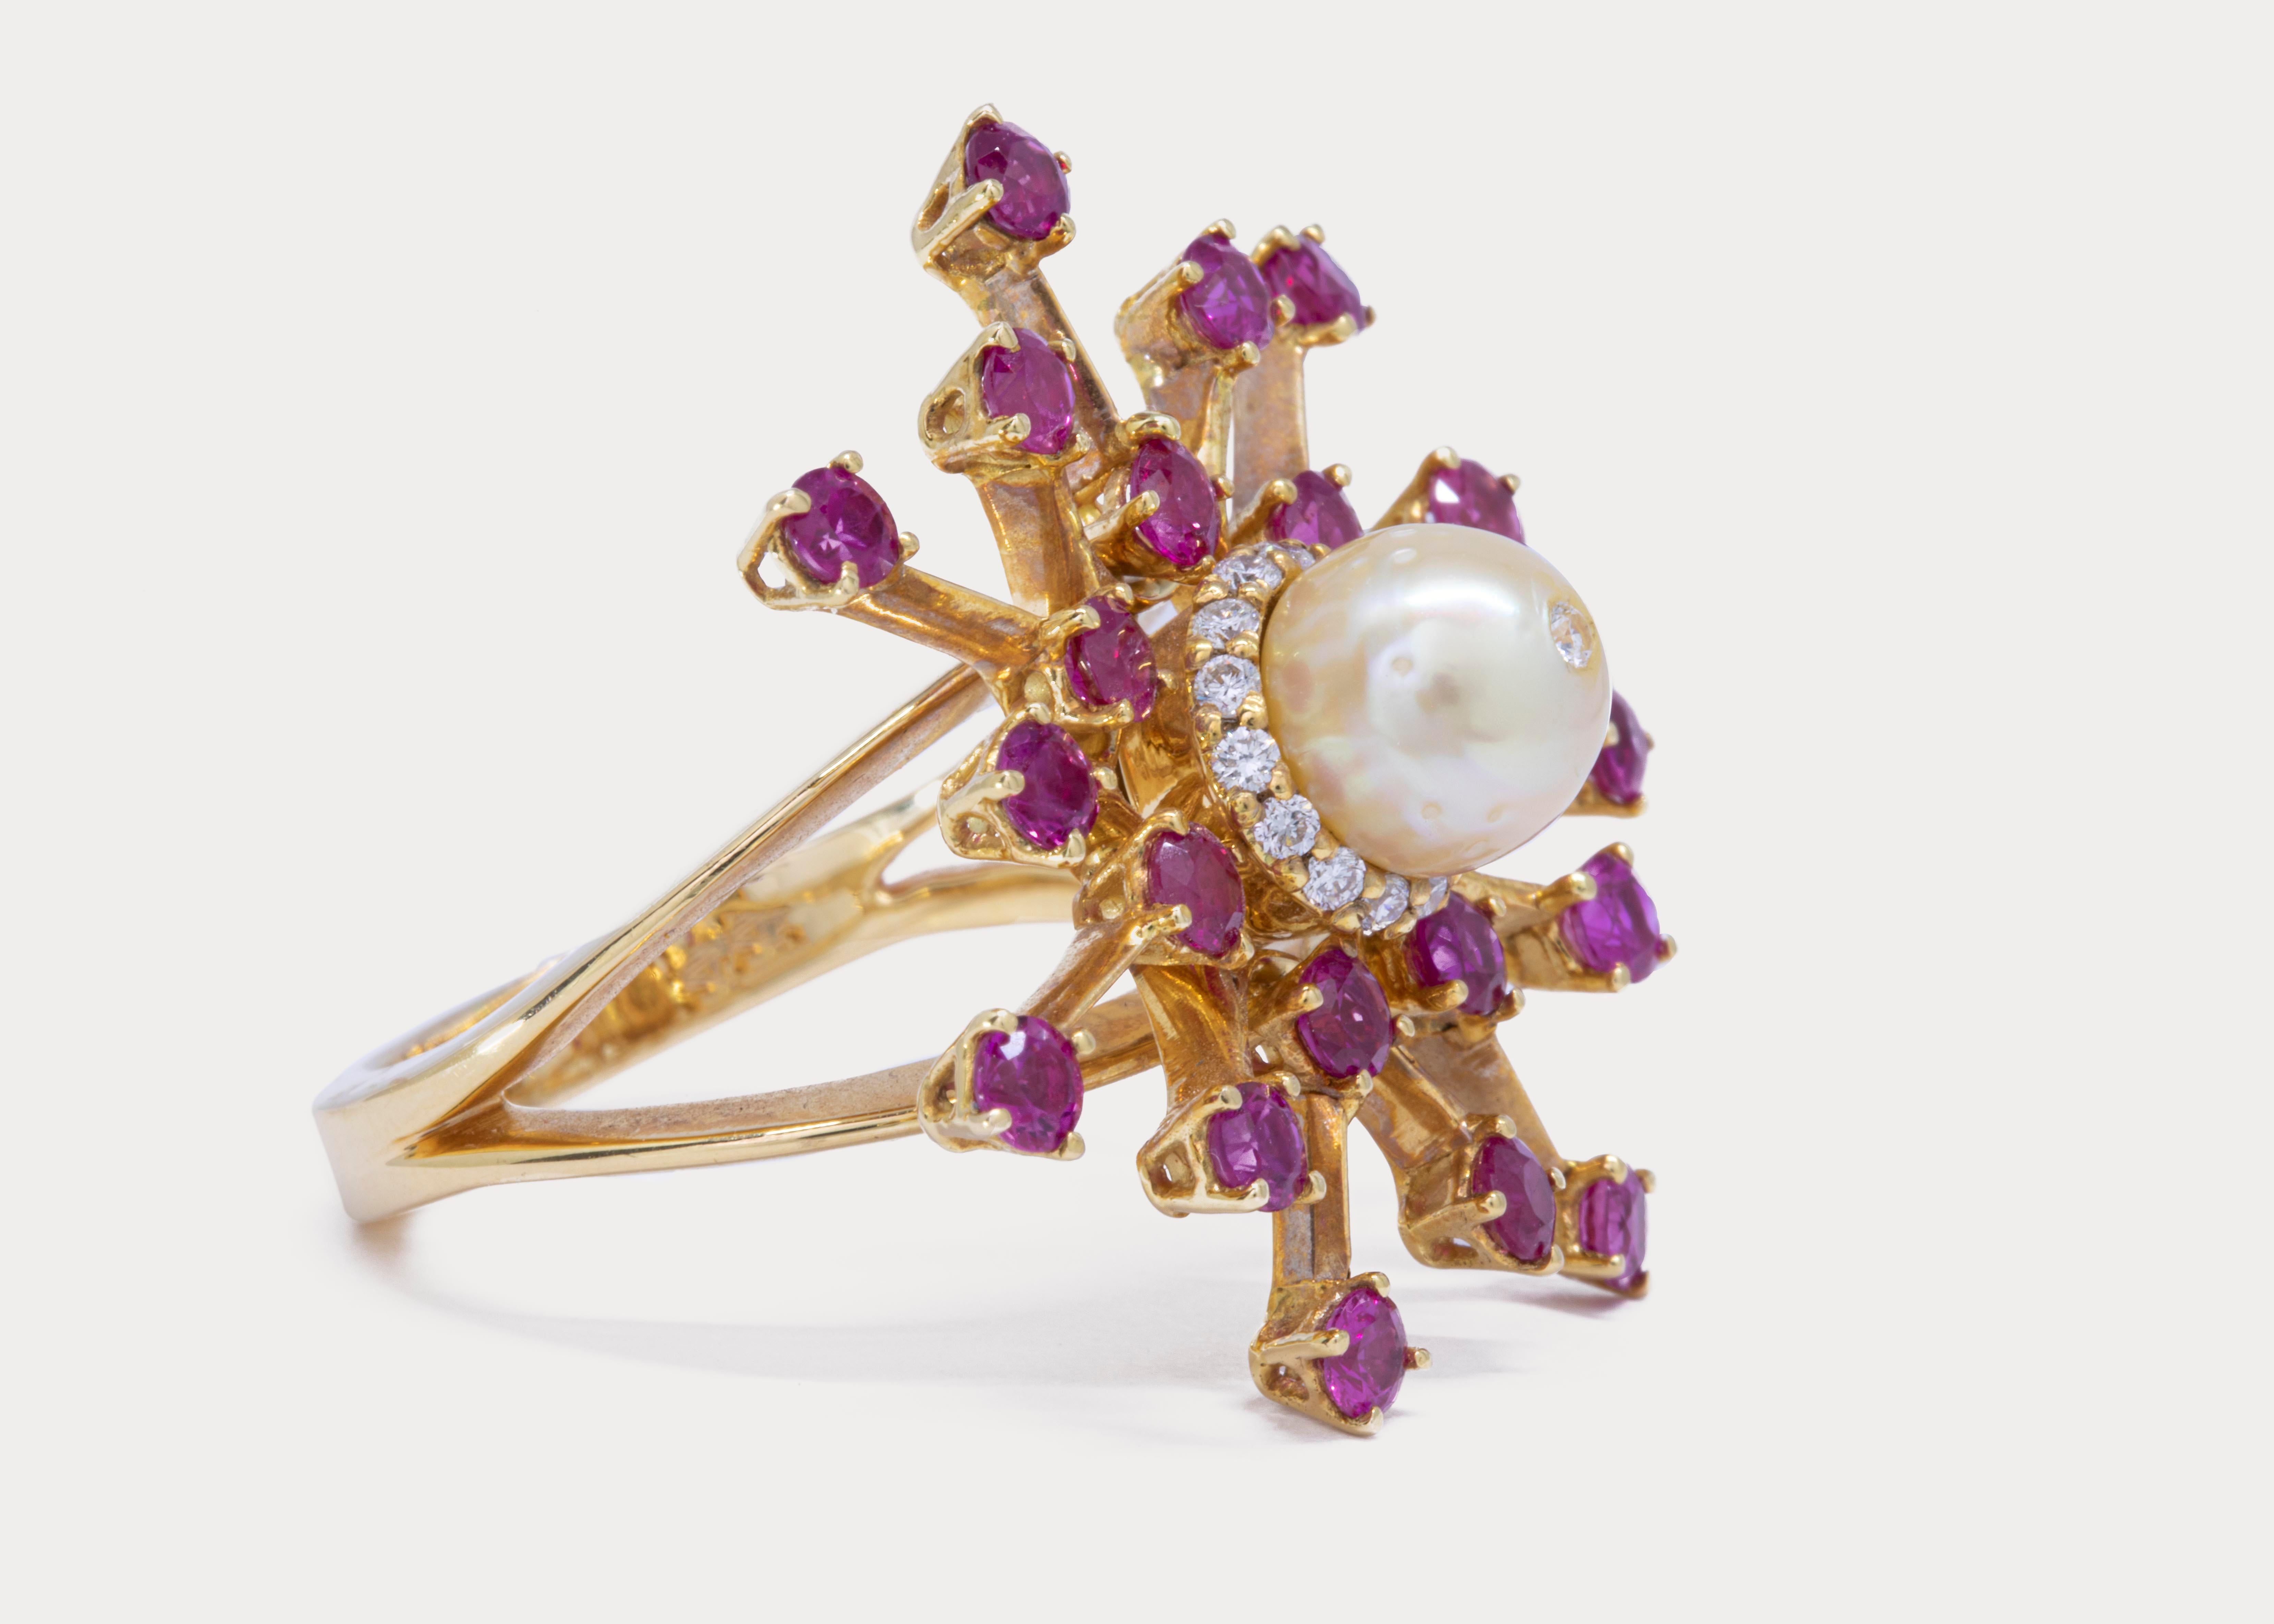 An 18k yellow gold ring centered with a drilled natural Bahraini Pearl surrounded by a diamond halo.
2.8 ct of flawless round rubies accentuate the cream colored pearl.

Gold Weight: 12.54
Pearl Weight: 3.12 ct.
Rubies Weight: 2.8 ct.
Diamonds